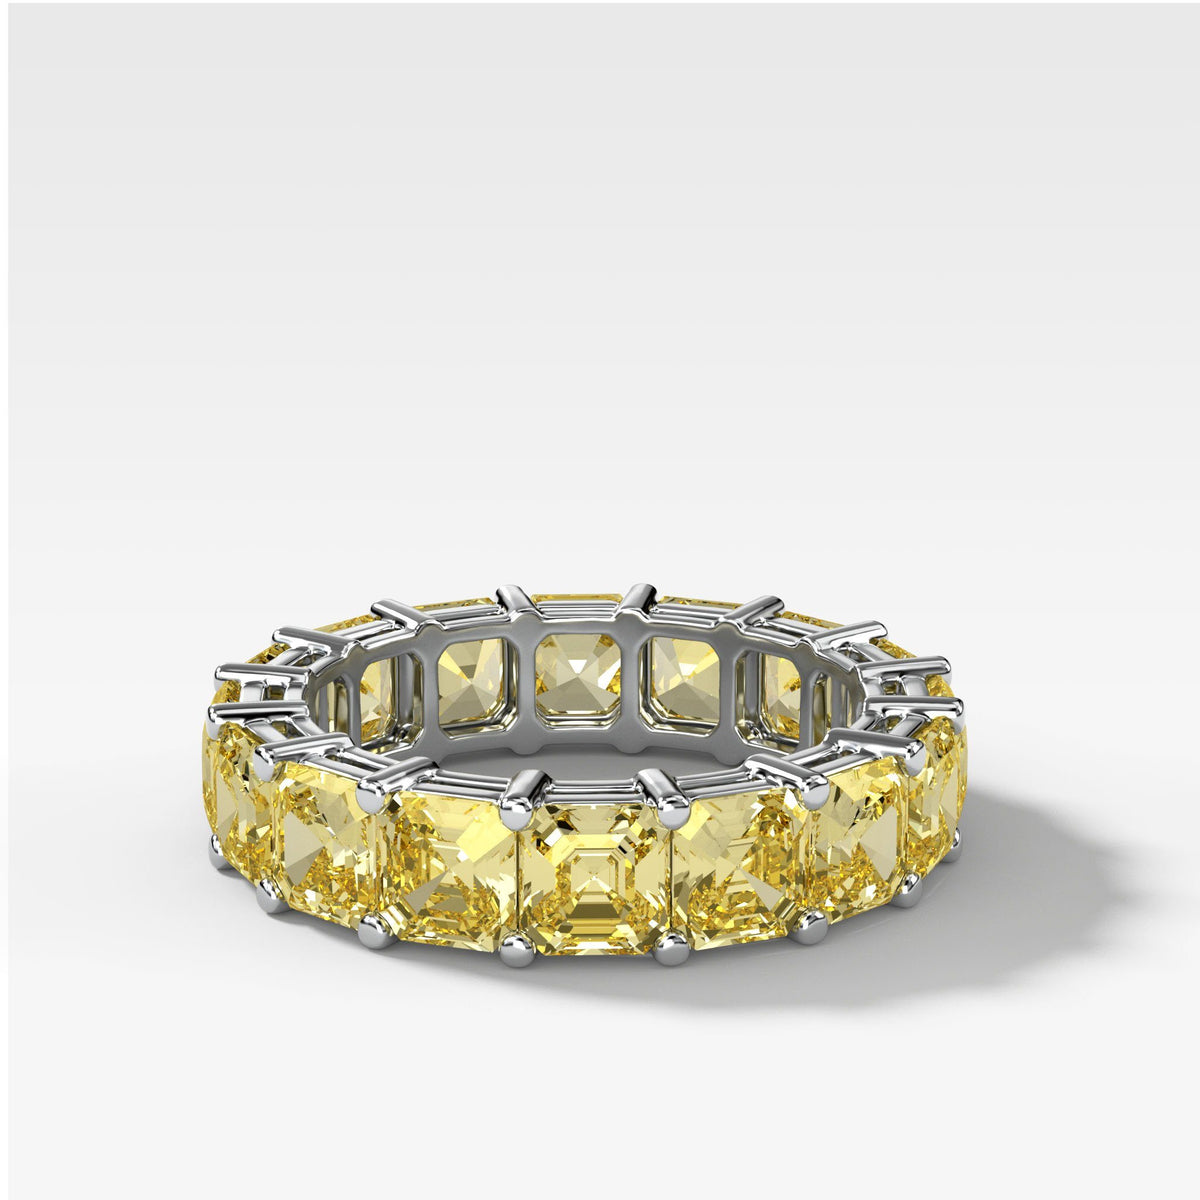 Asscher Cut Constellation Eternity Band With Yellow Diamonds by Good Stone in White Gold